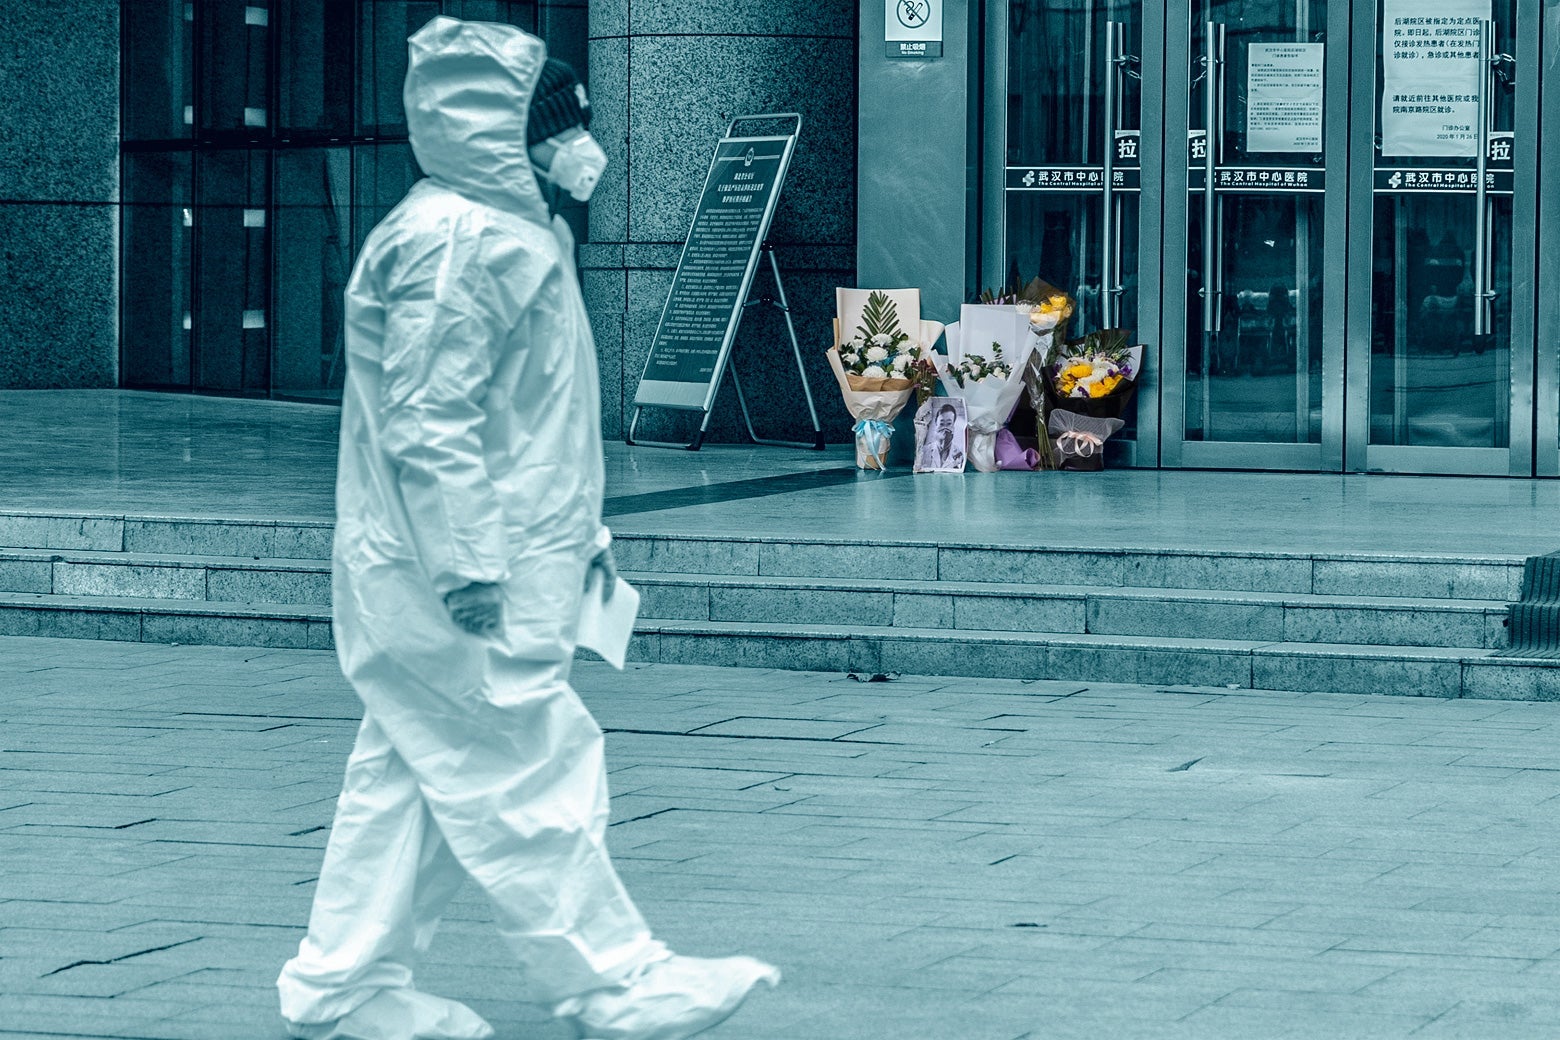 A medical staff member in full-body protective gear walks past a flower tribute on the ground outside the hospital doors